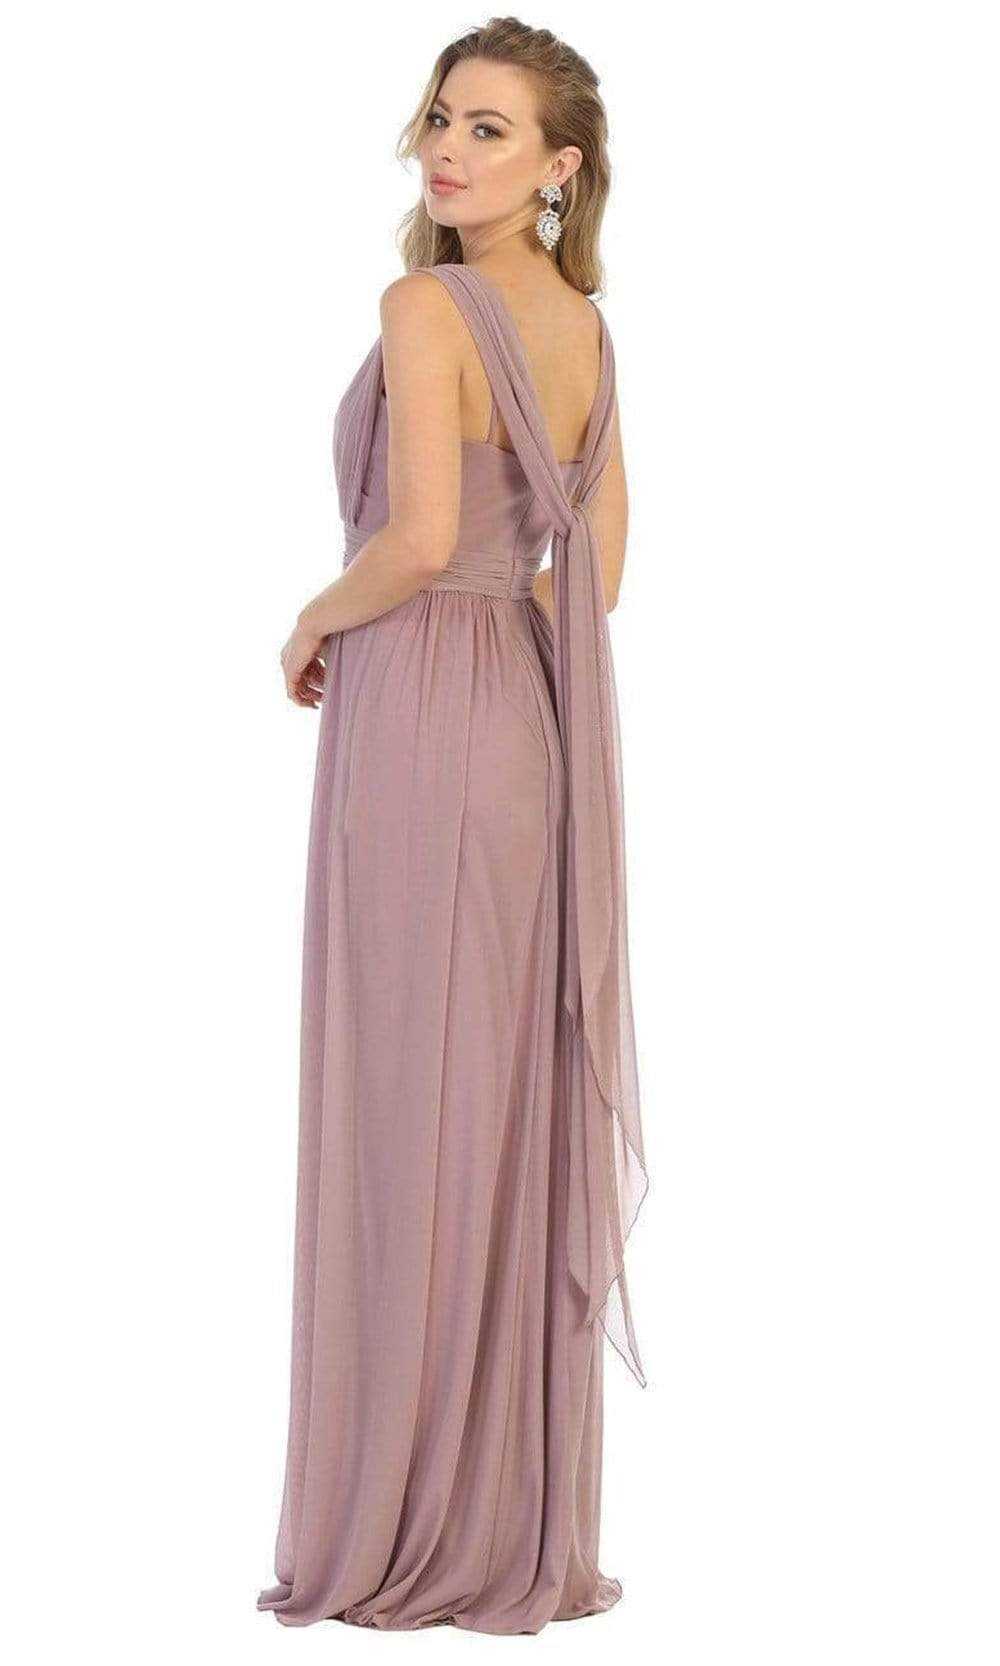 May Queen, May Queen - Ruched Asymmetric Sheath Dress MQ1746 - 1 pc Mauve In Size 18 Available